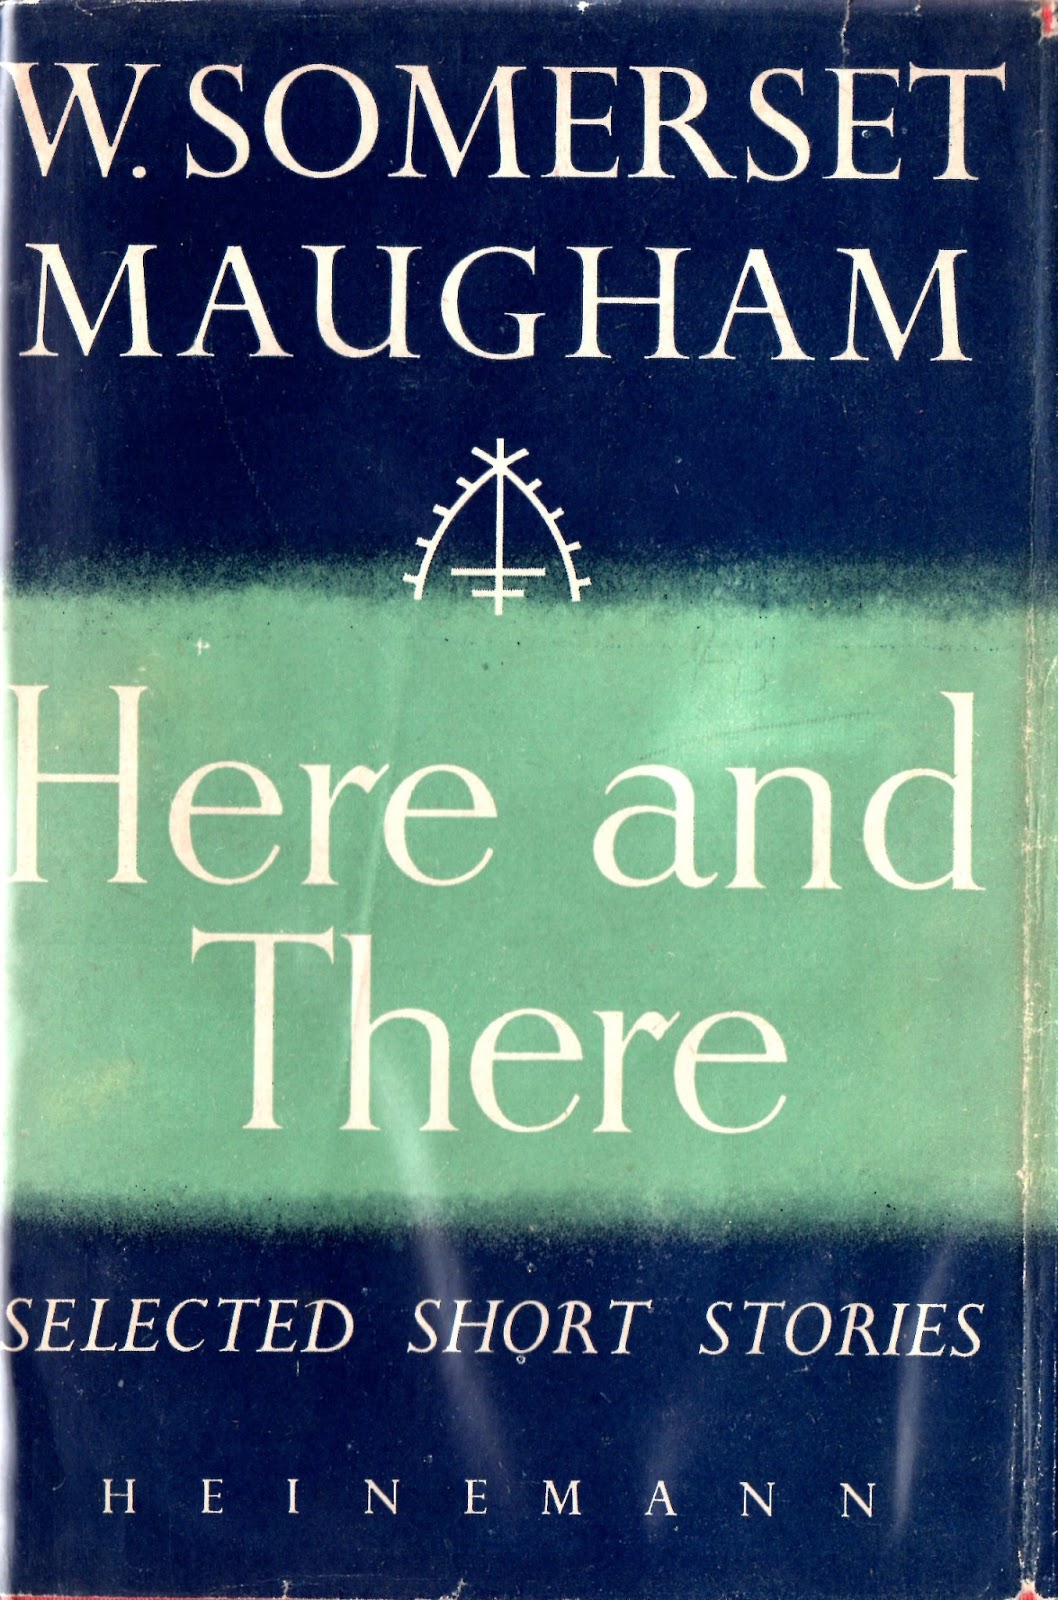 the lotus eater by somerset maugham summary